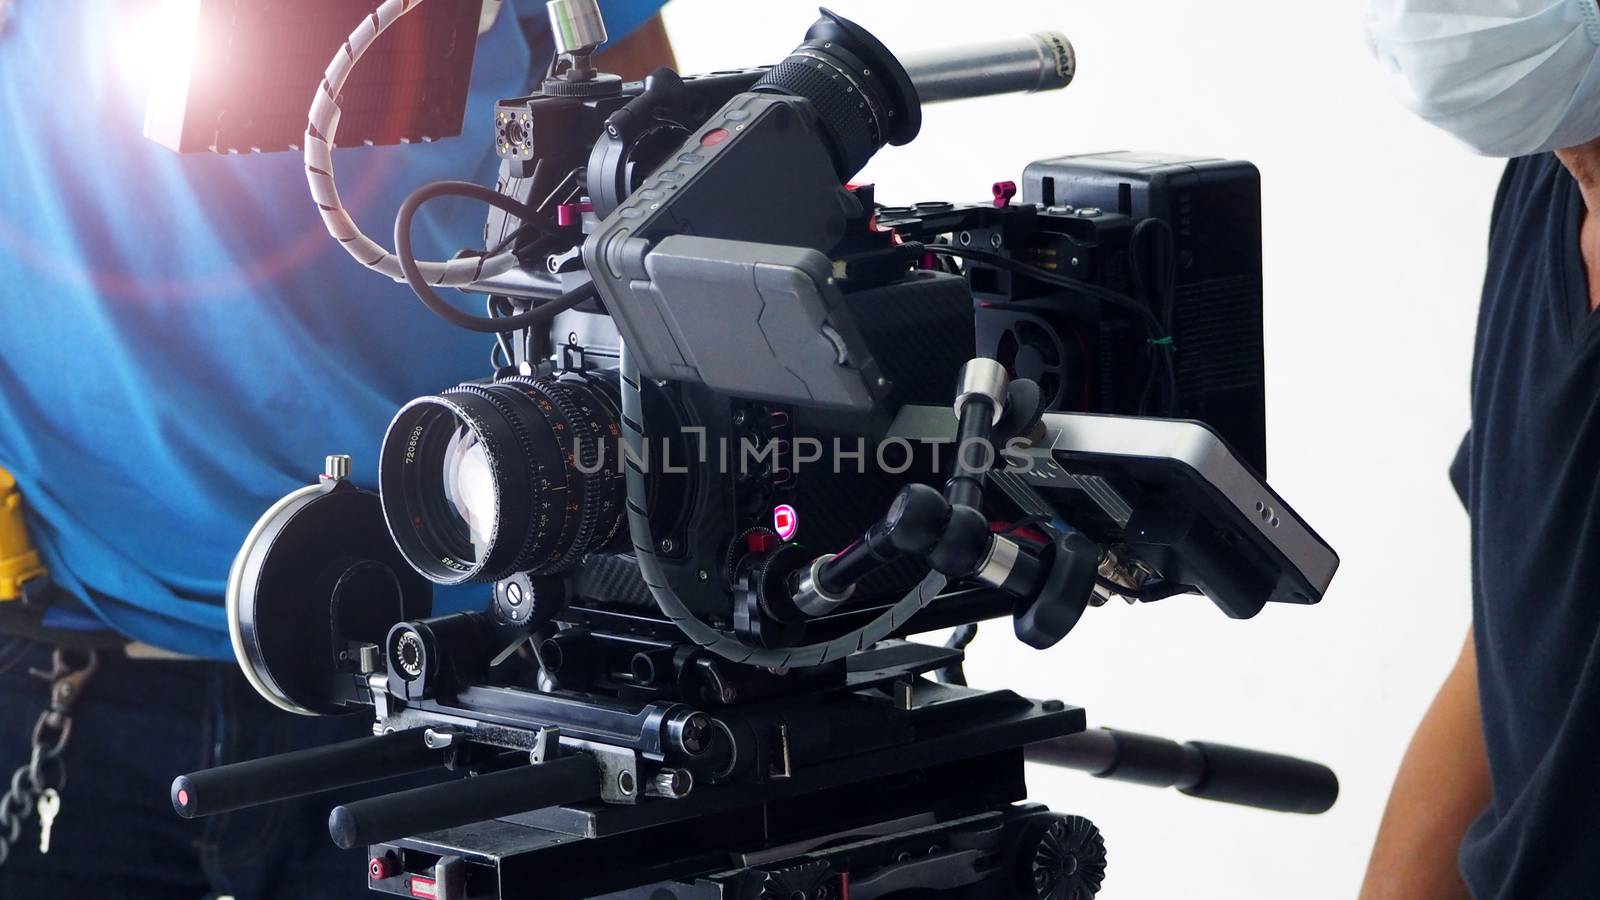 4K high definition video camera shooting. by gnepphoto